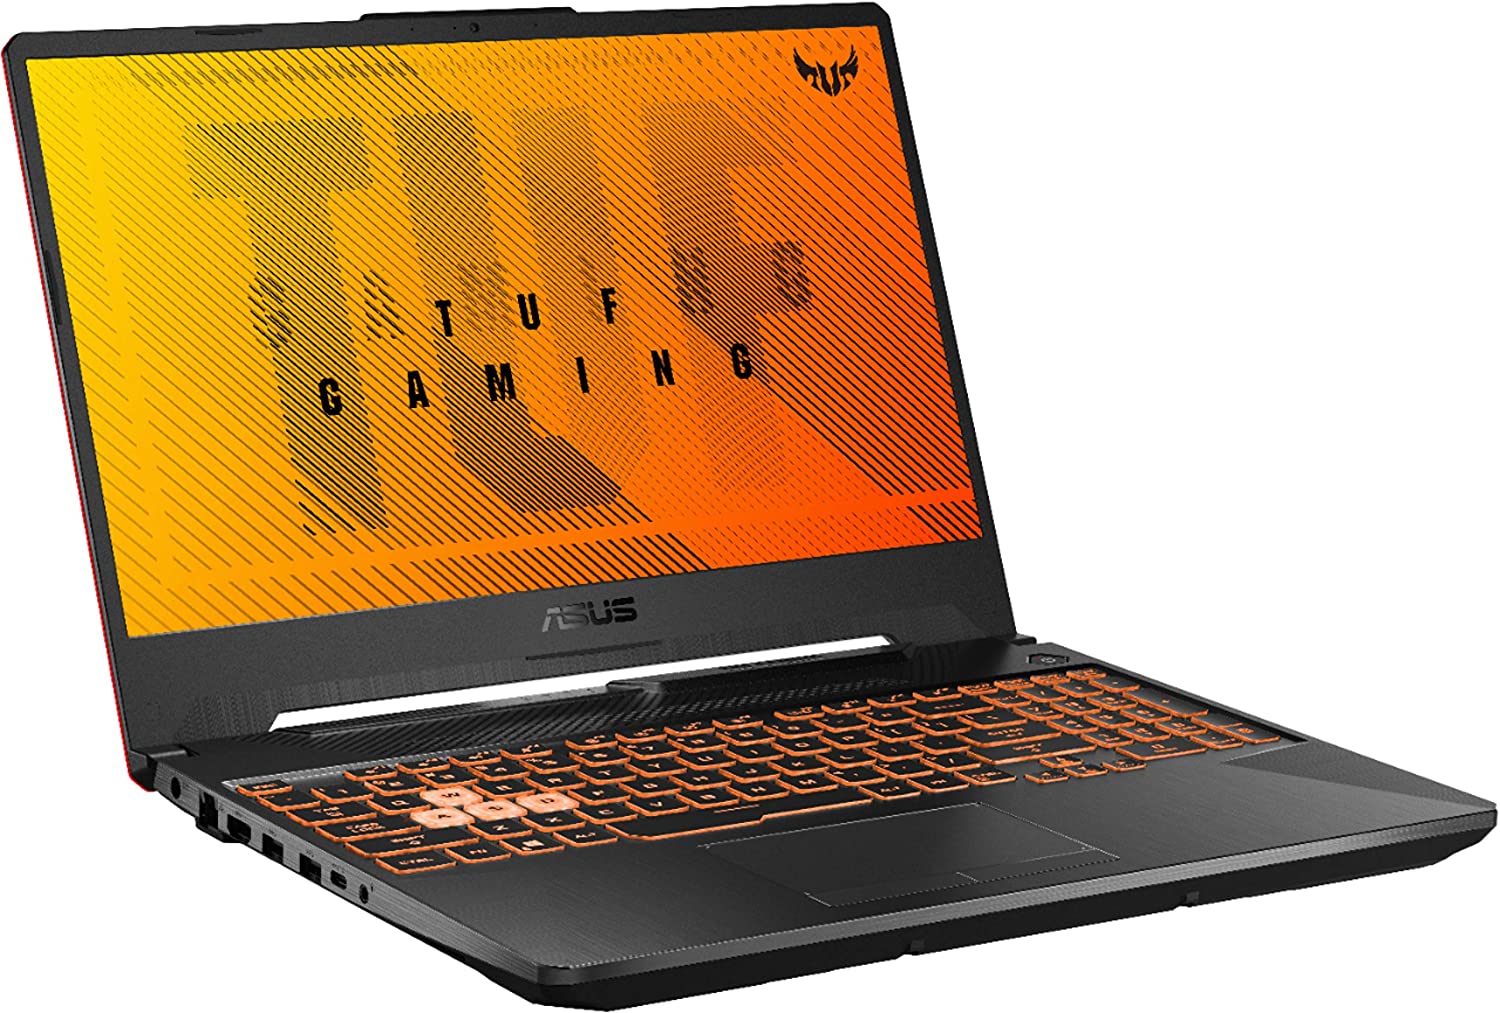 ASUS TUF Gaming 15 6 Full HD Laptop Intel Core i5 10300H 8GB Memory 256GB SSD NVIDIA GeForce GTX 1650 Ti Black 15 15 99 inches - DealYaSteal